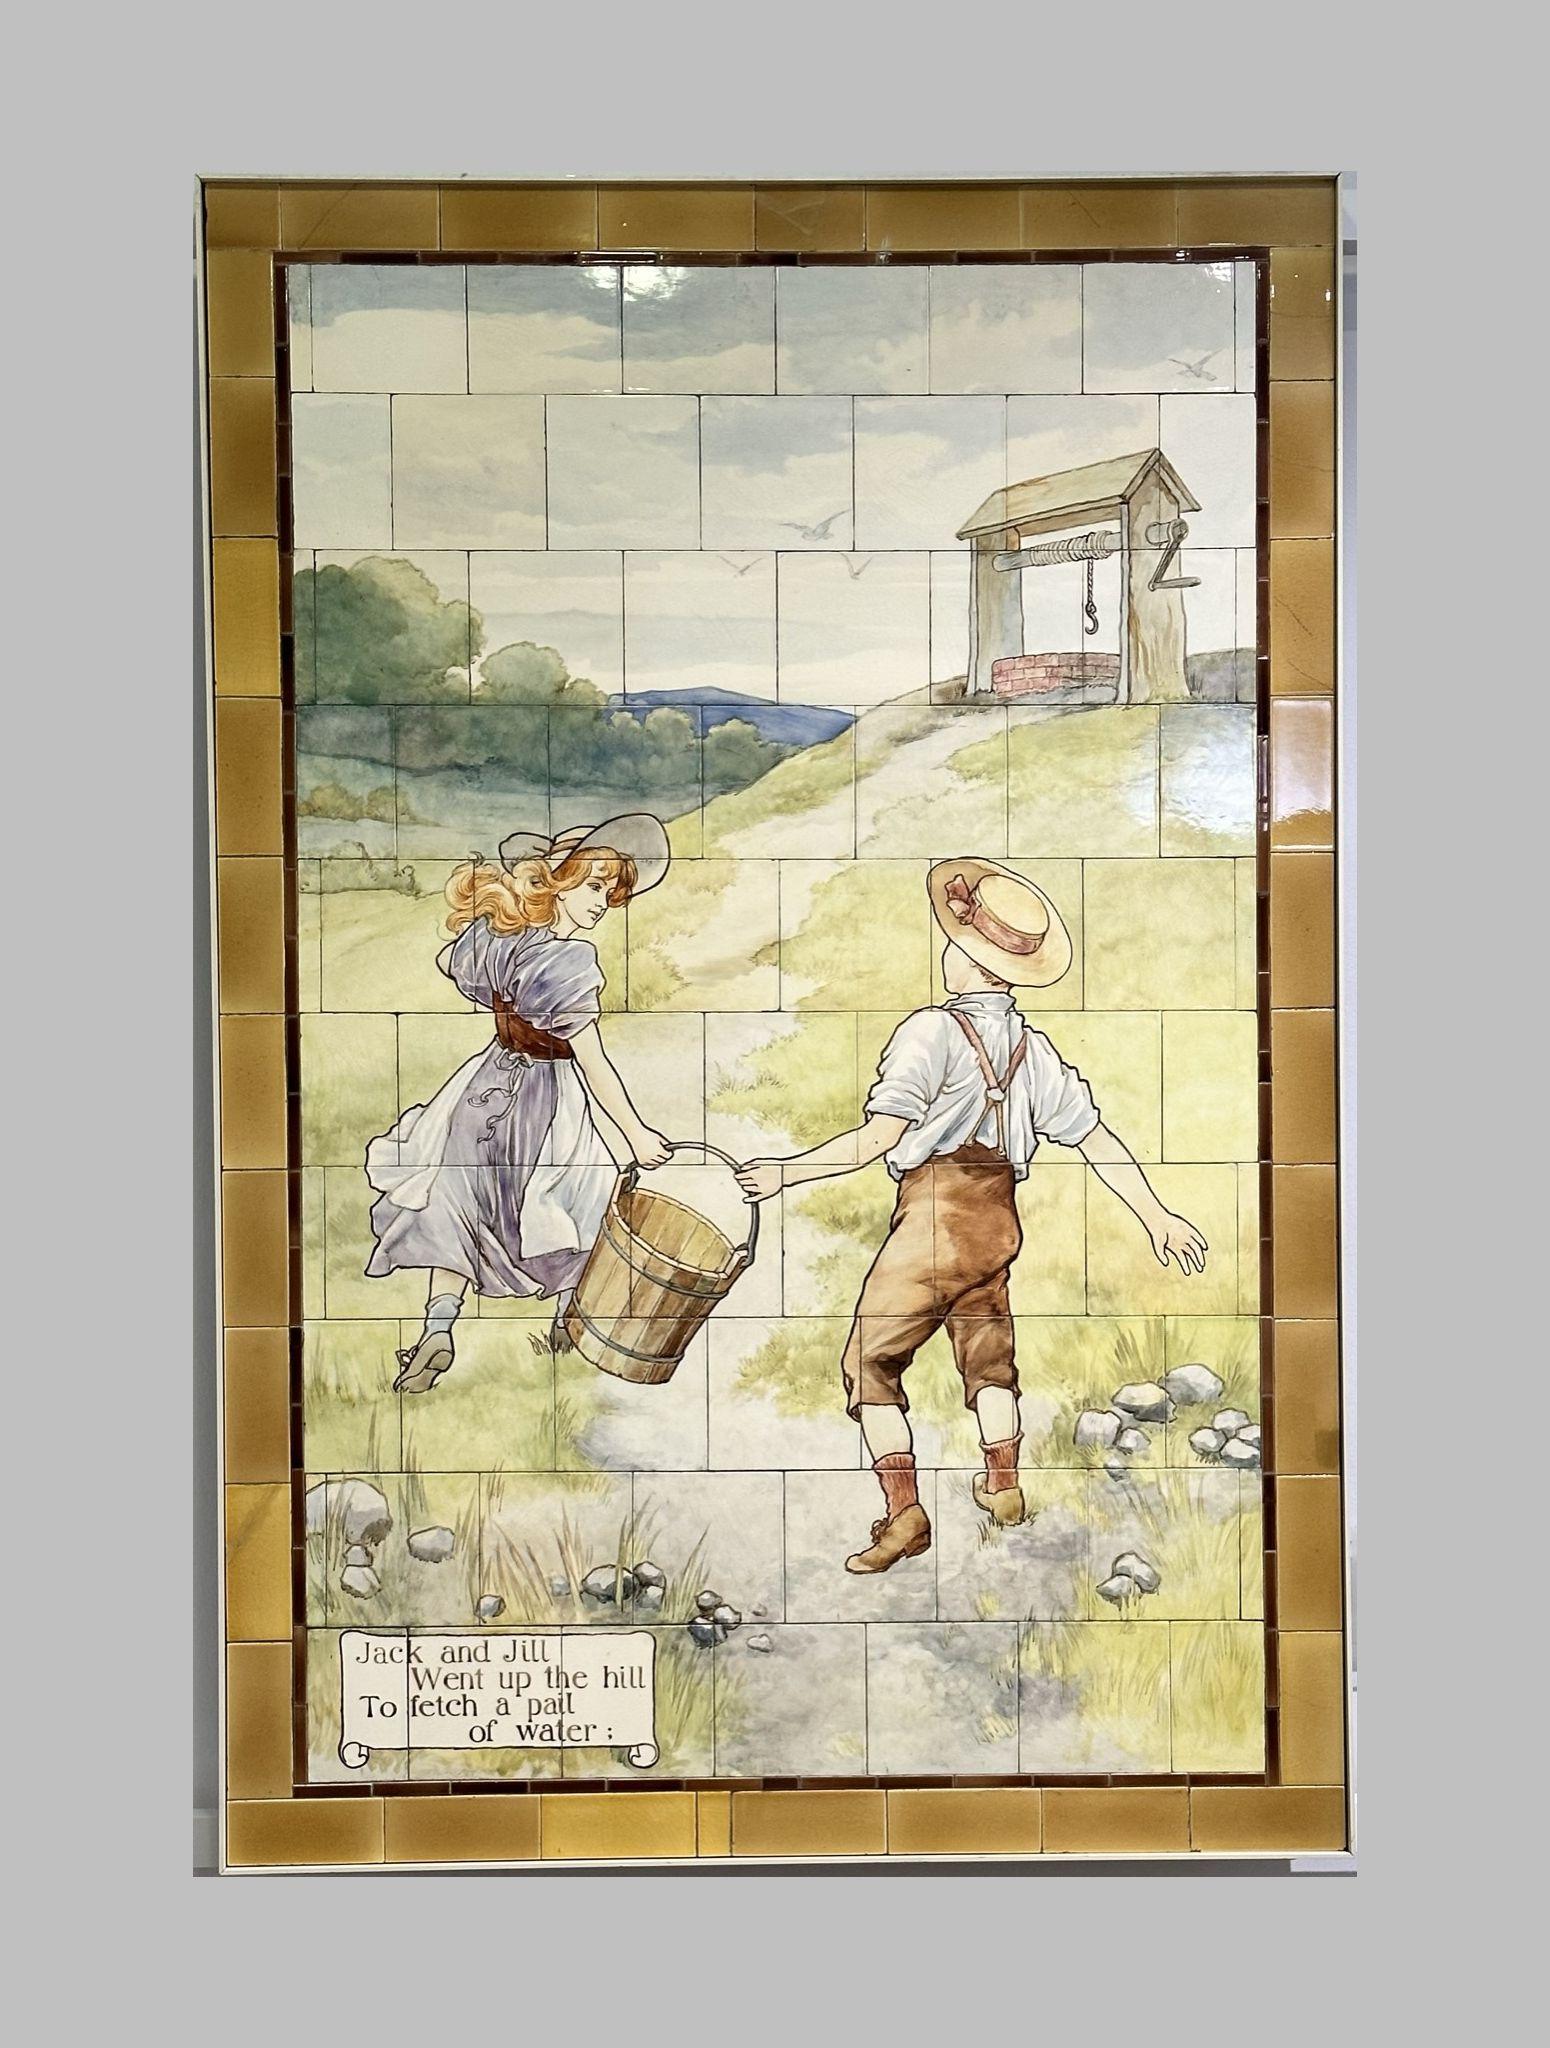 Jack And Jill scene painted on Doulton tiles (commissioned around 1900) from the Evelina Children's Hospital displayed in the long corridor at St Thomas' hospital.